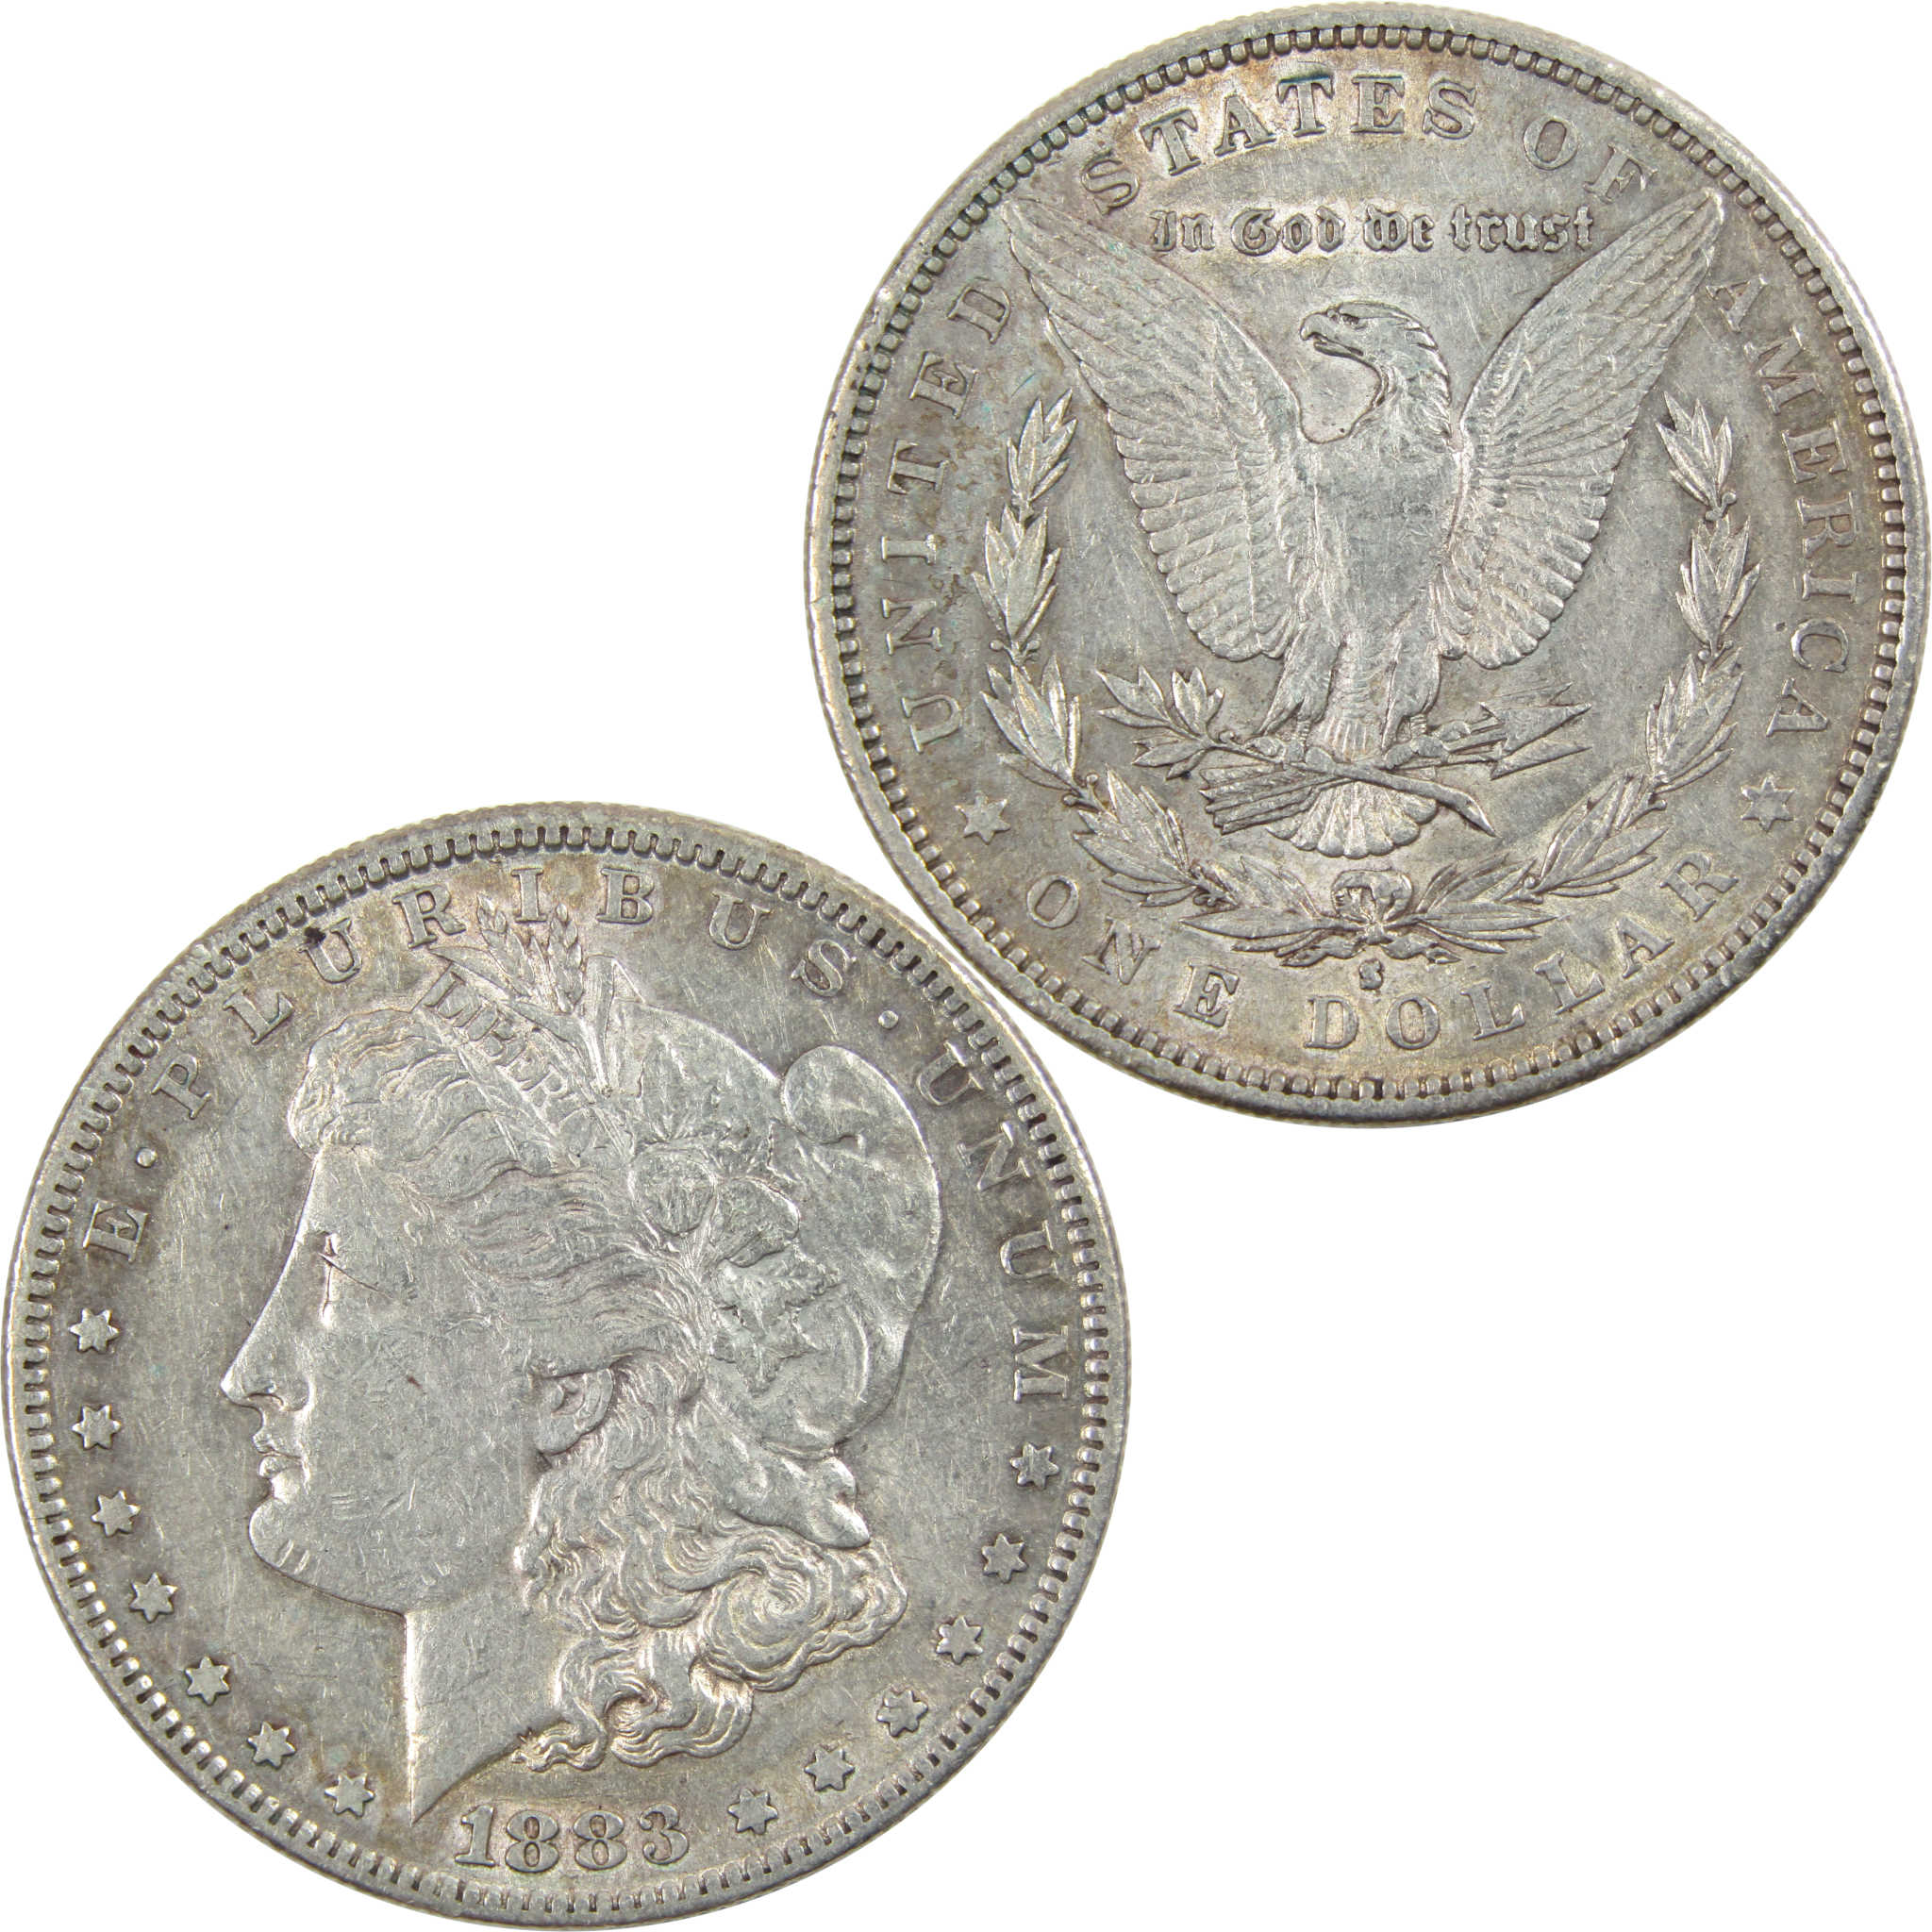 1883 S Morgan Dollar XF EF Extremely Fine Details Silver $1 SKU:I5915 - Morgan coin - Morgan silver dollar - Morgan silver dollar for sale - Profile Coins &amp; Collectibles